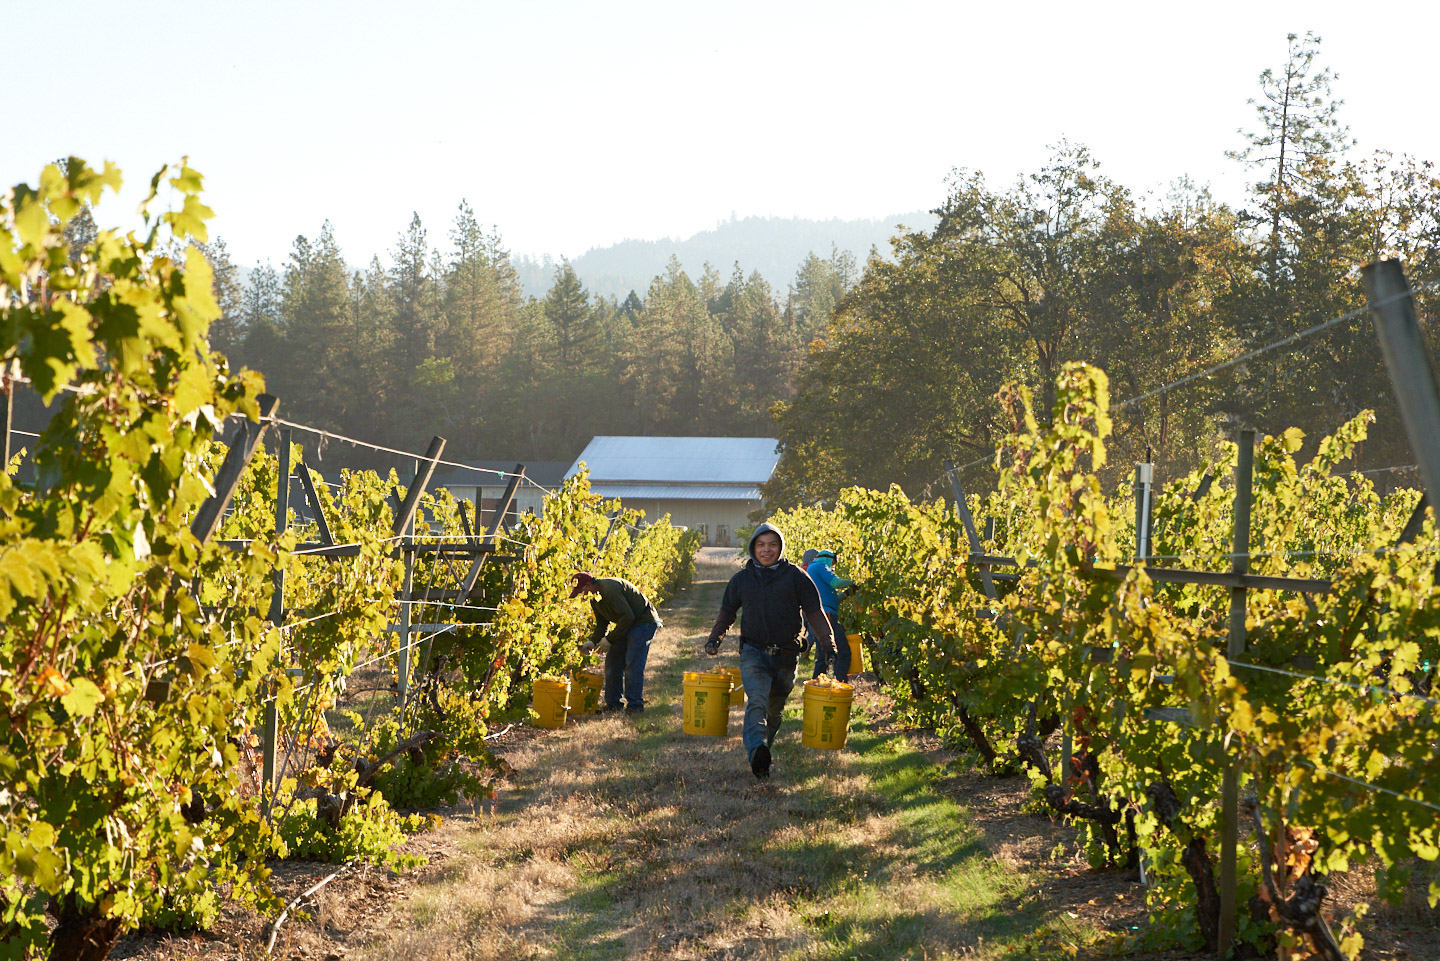 commercial-lifestyle-reportage-photographer-vineyard-workers-portland-oregon